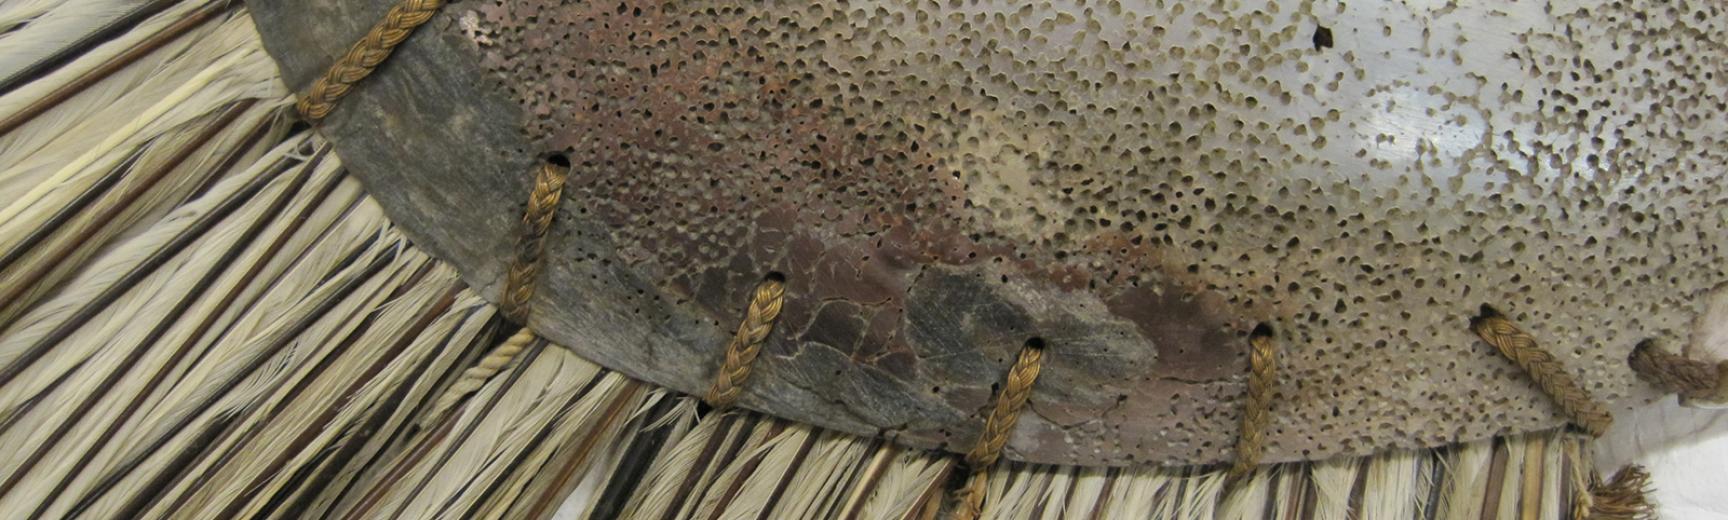 Detail of pearlshell and tropicbird feathers (1886.1.1673.3.1)